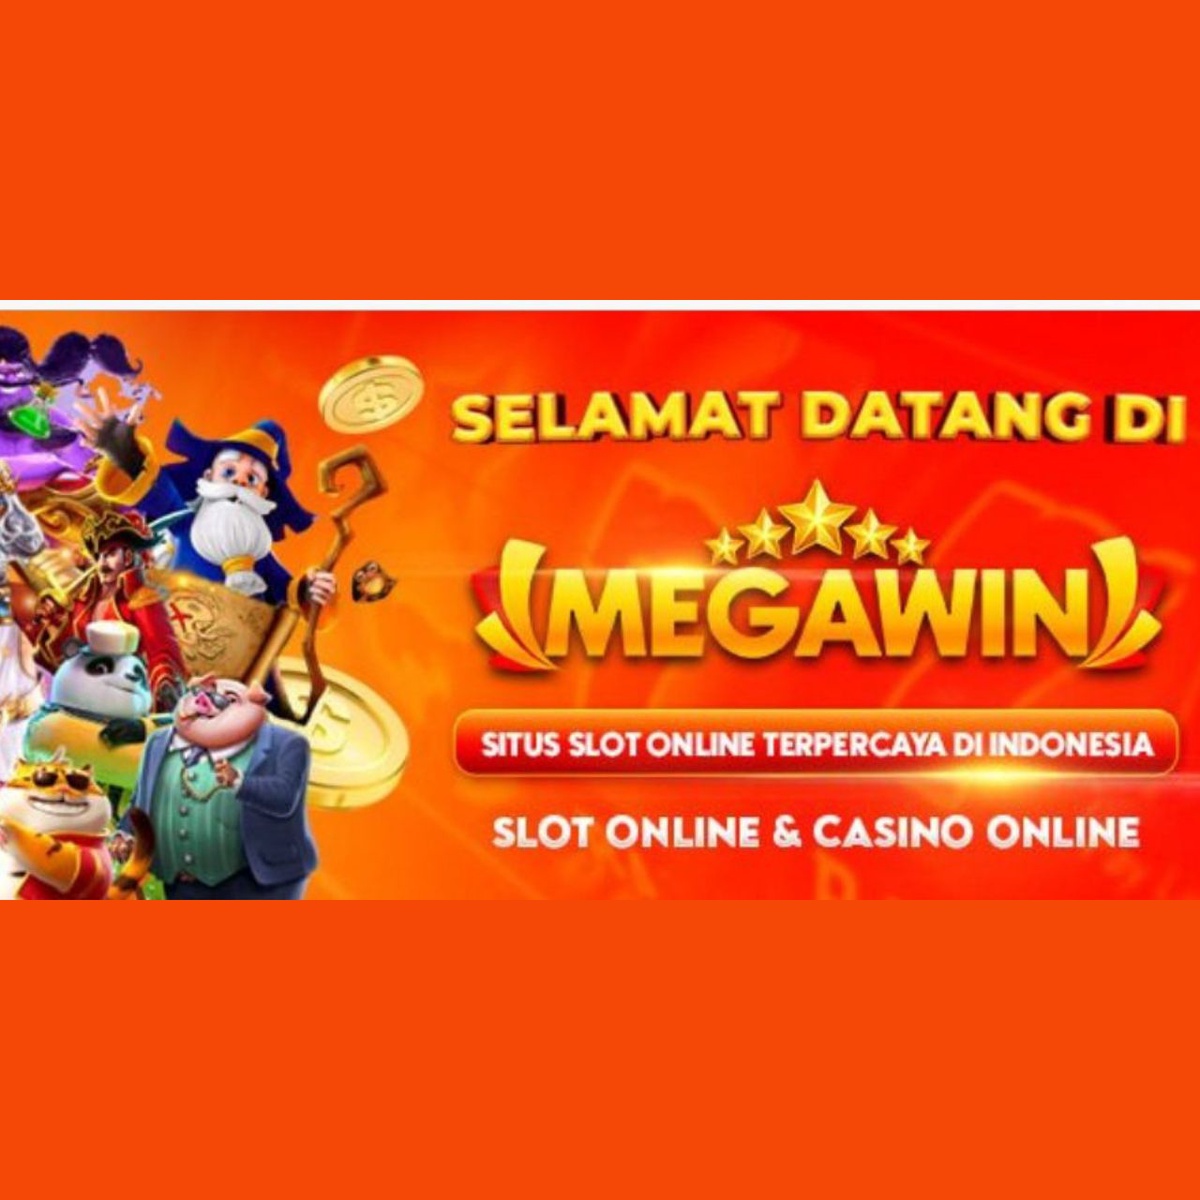 our Trusted Indonesian Gambling Destination with a 100% Winning Payout Guarantee